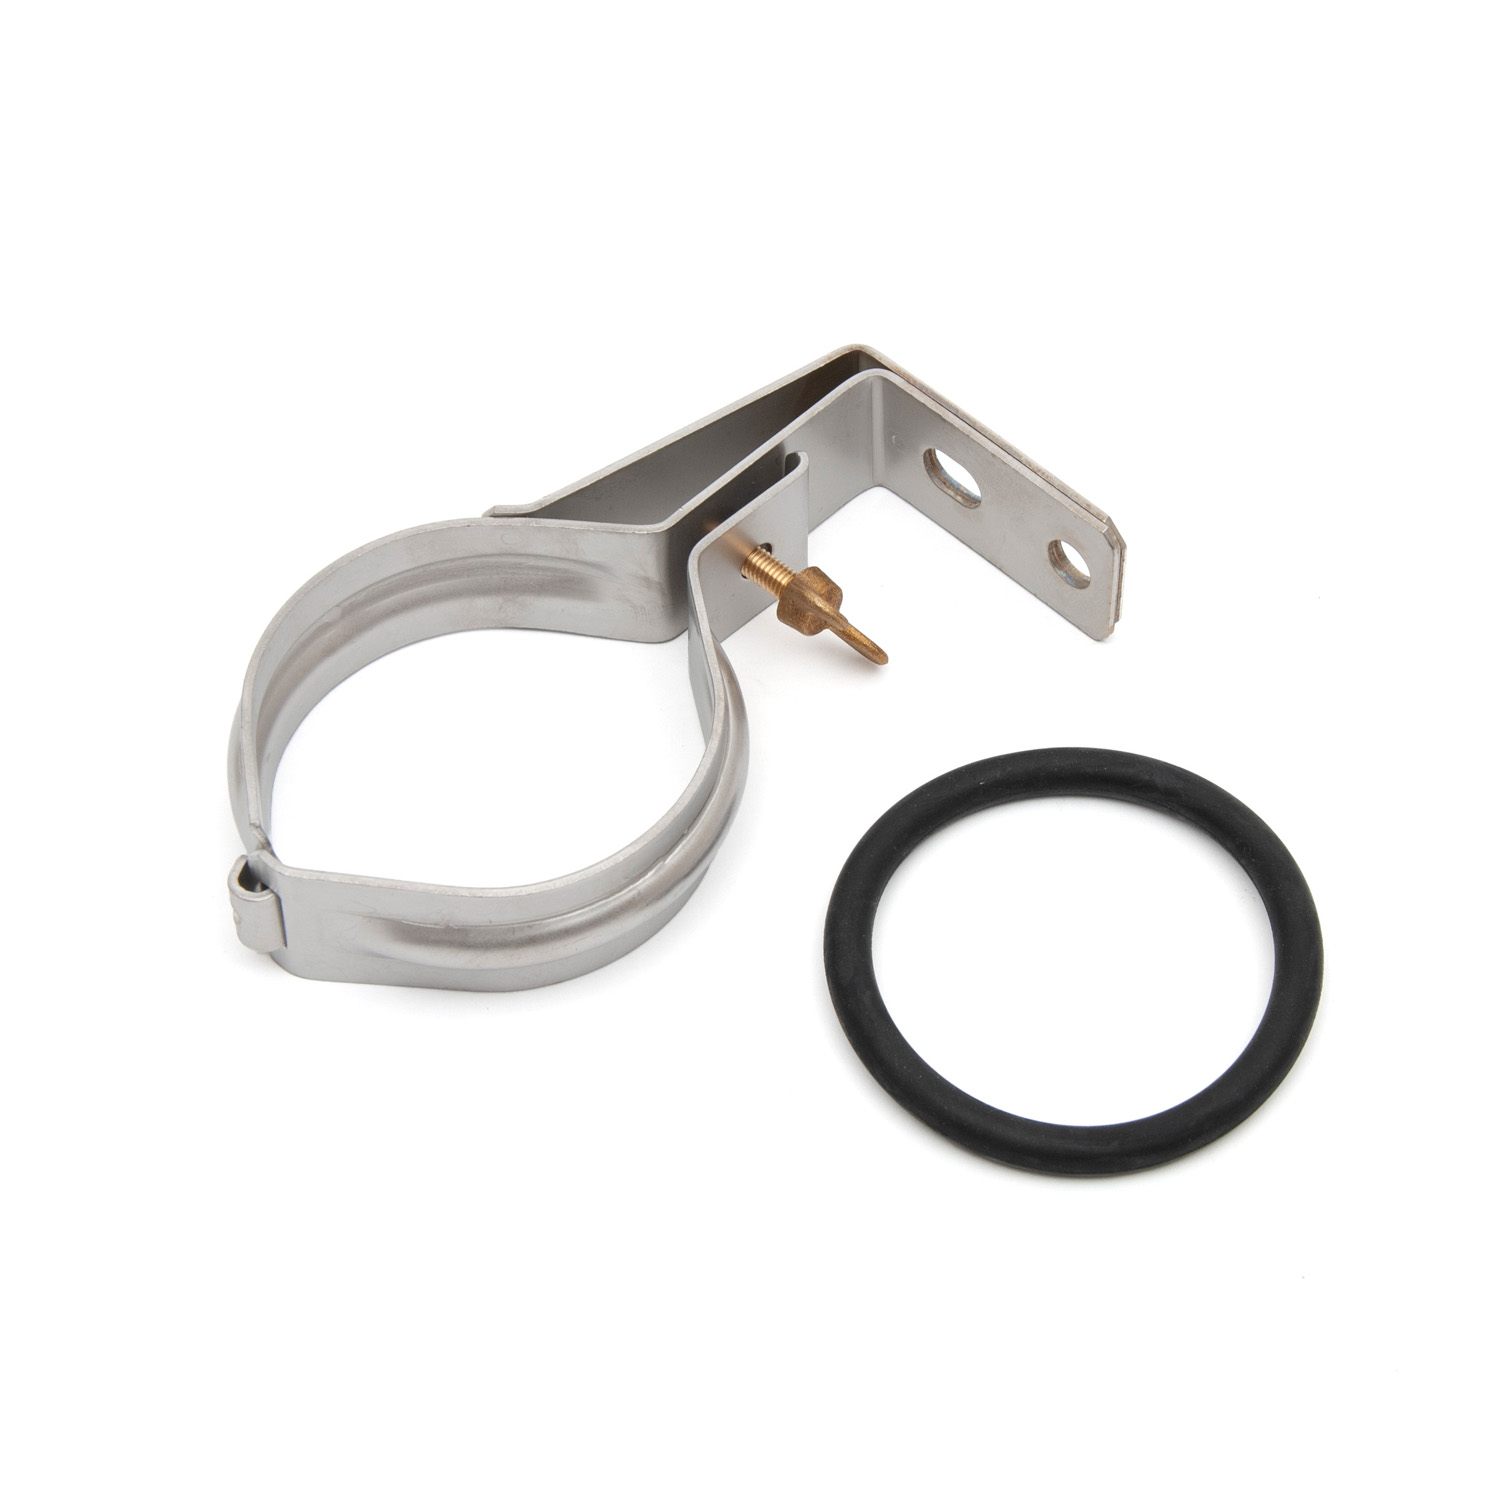 9840025500 Fixing clamp stainless steel, for types 1053/0273/1773/0673

Old article no: 8105400900